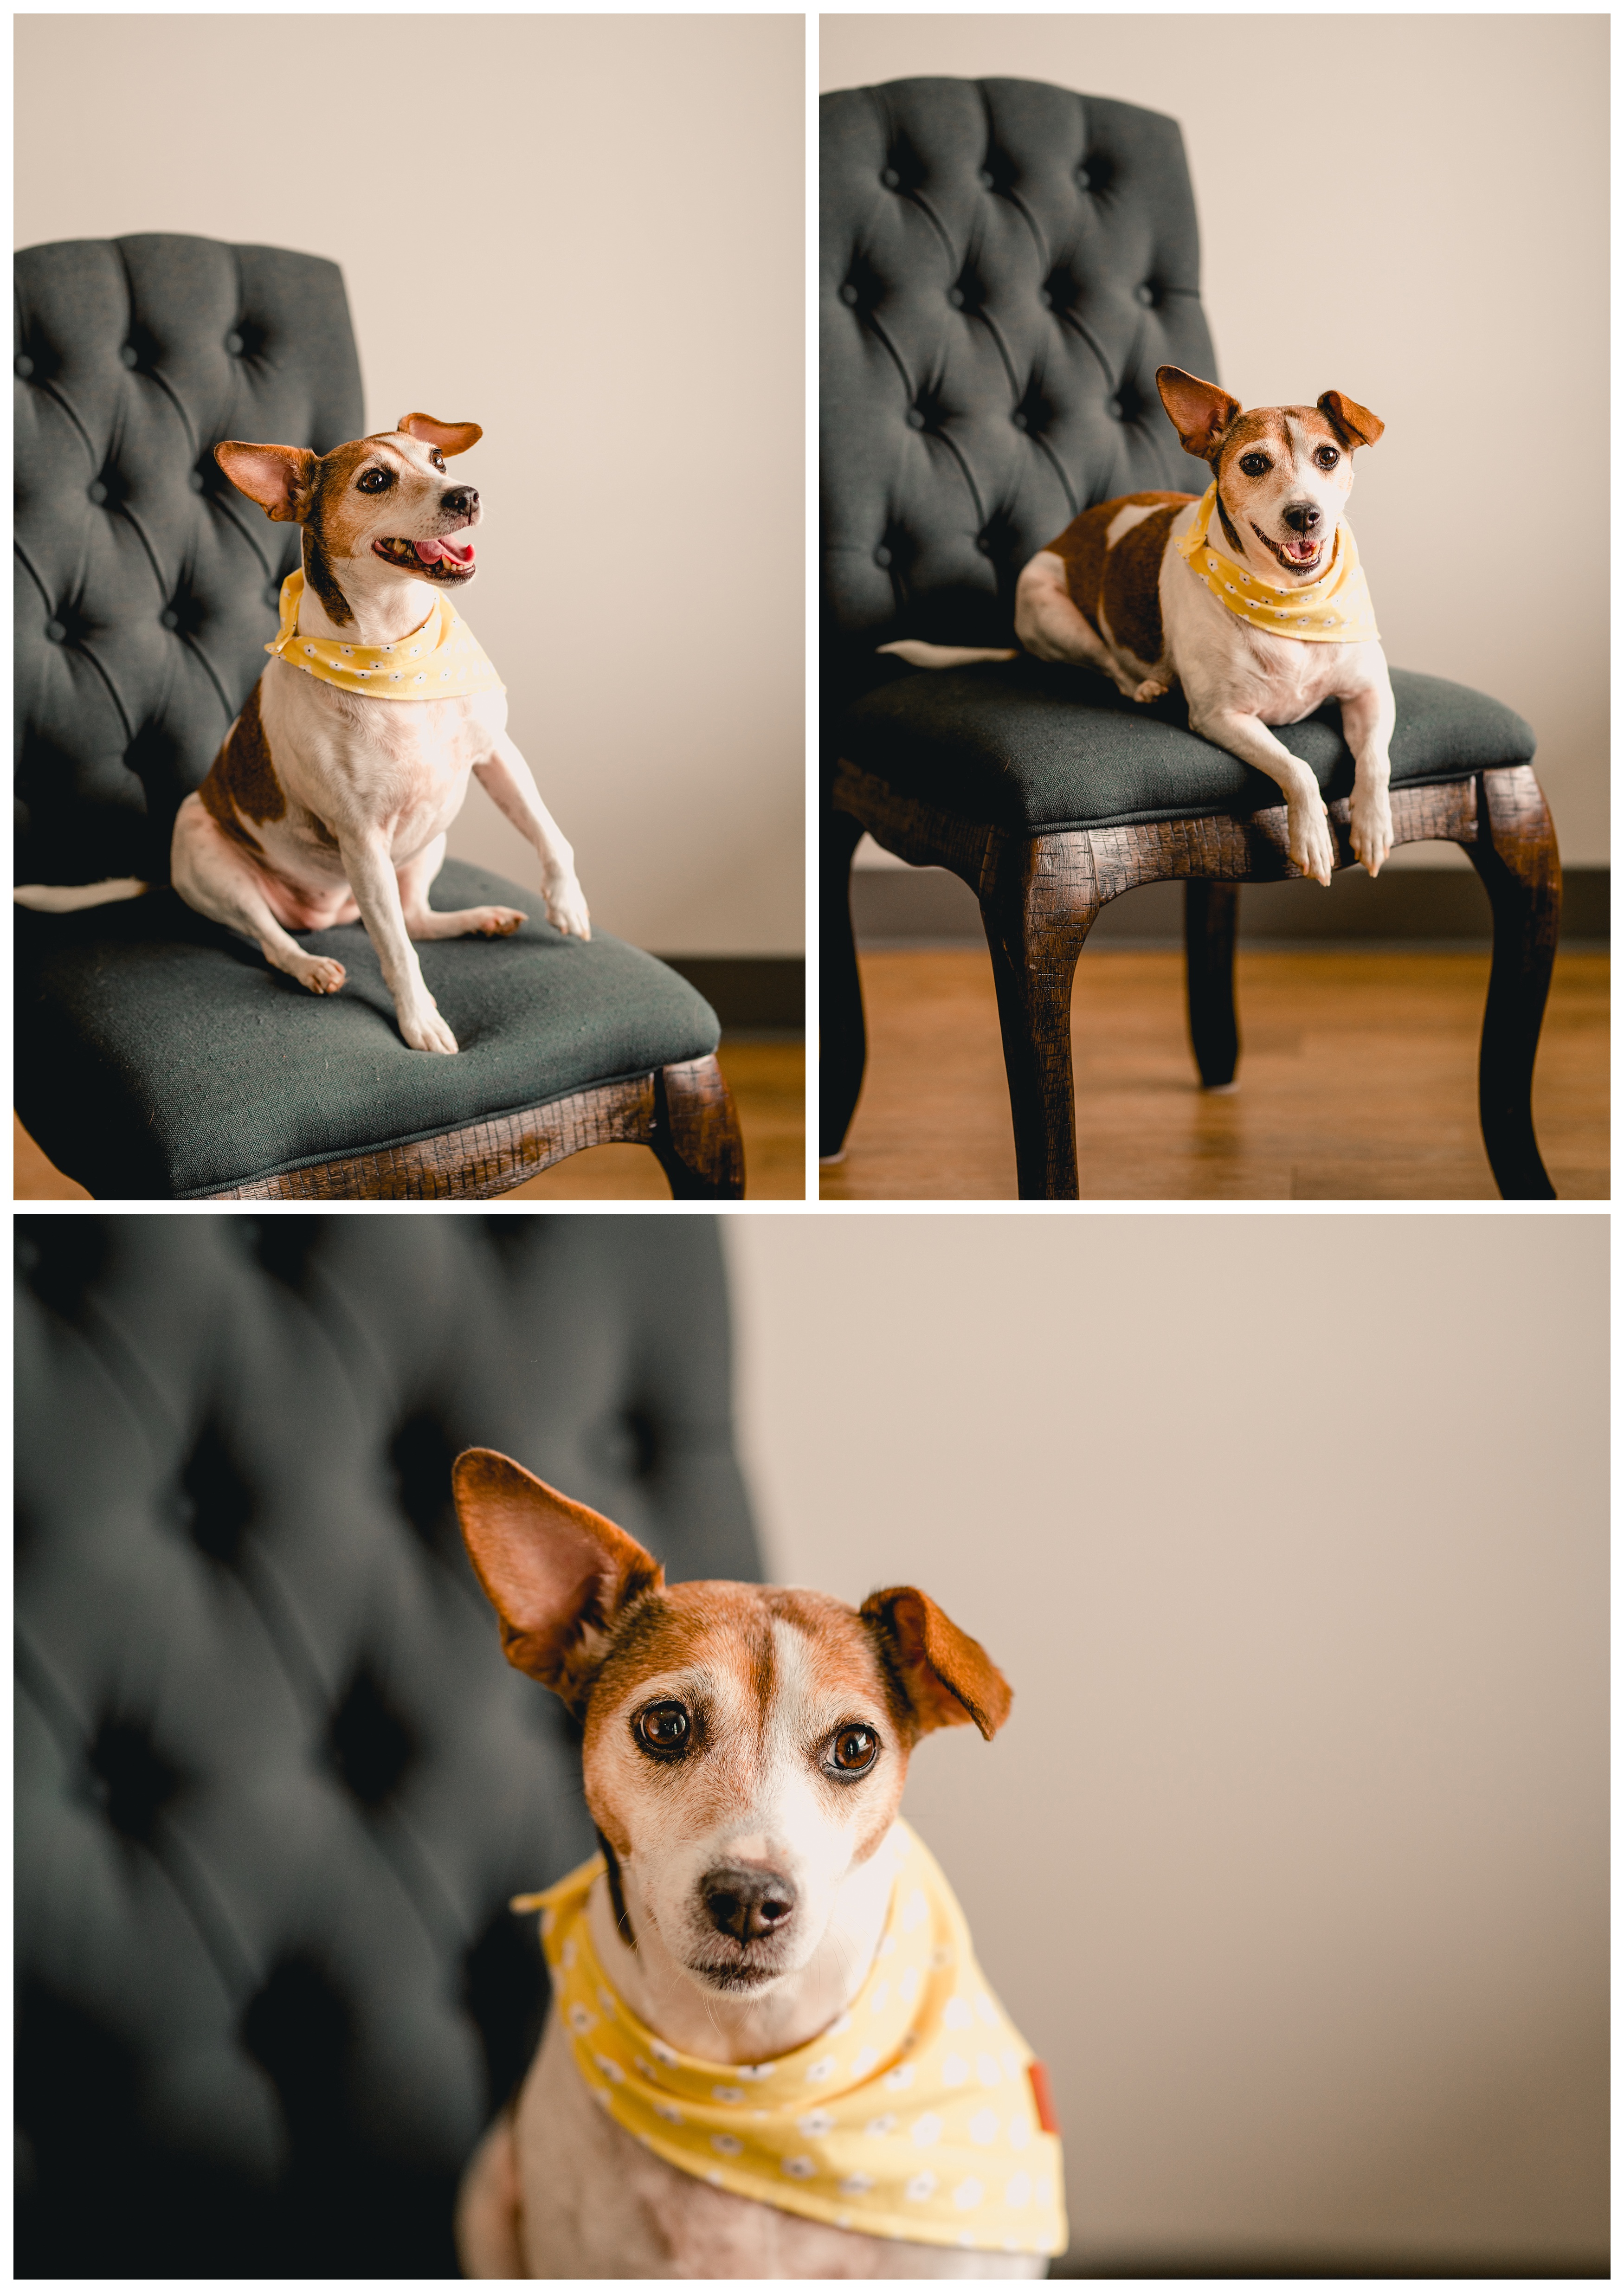 Studio pet photos in Live Oak, FL get personalities of the dogs in the photographs. Shelly Williams Photography